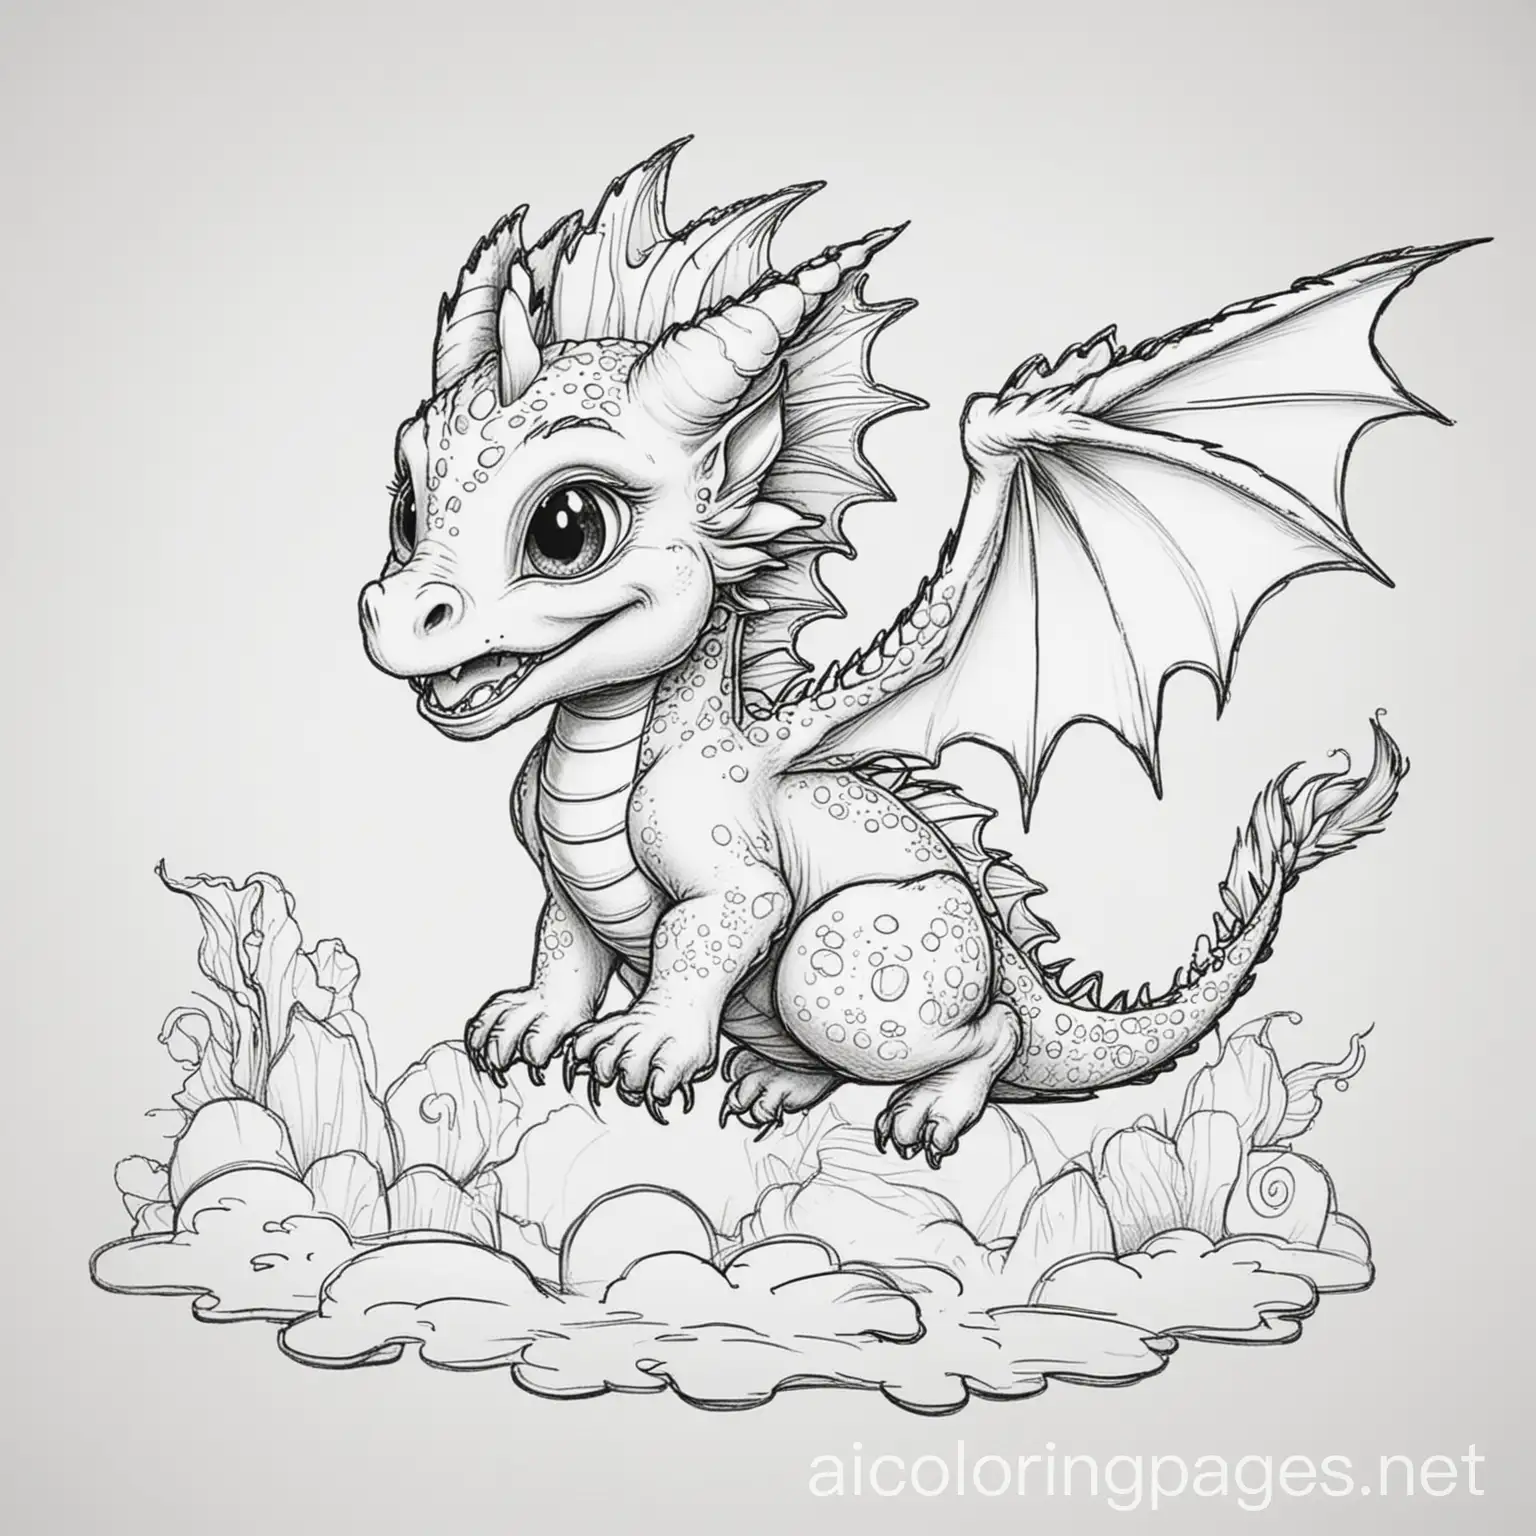 Baby dragon flying
High detail
Adult coloring book, Coloring Page, black and white, line art, white background, Simplicity, Ample White Space. The background of the coloring page is plain white to make it easy for young children to color within the lines. The outlines of all the subjects are easy to distinguish, making it simple for kids to color without too much difficulty